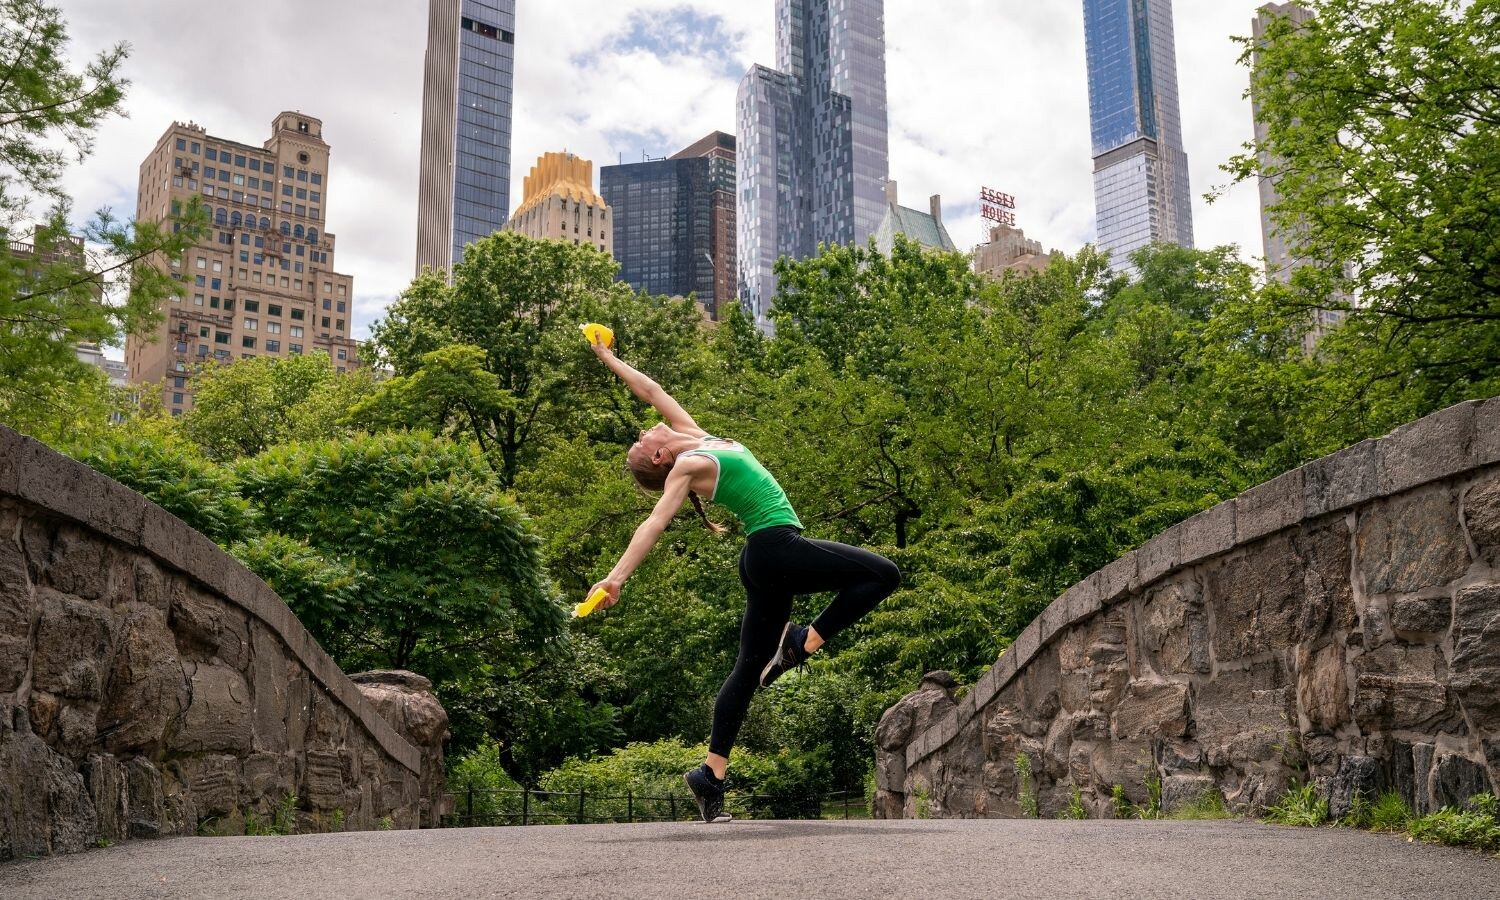 A woman in athletic clothing dances on a bridge in Central Park, New York City.